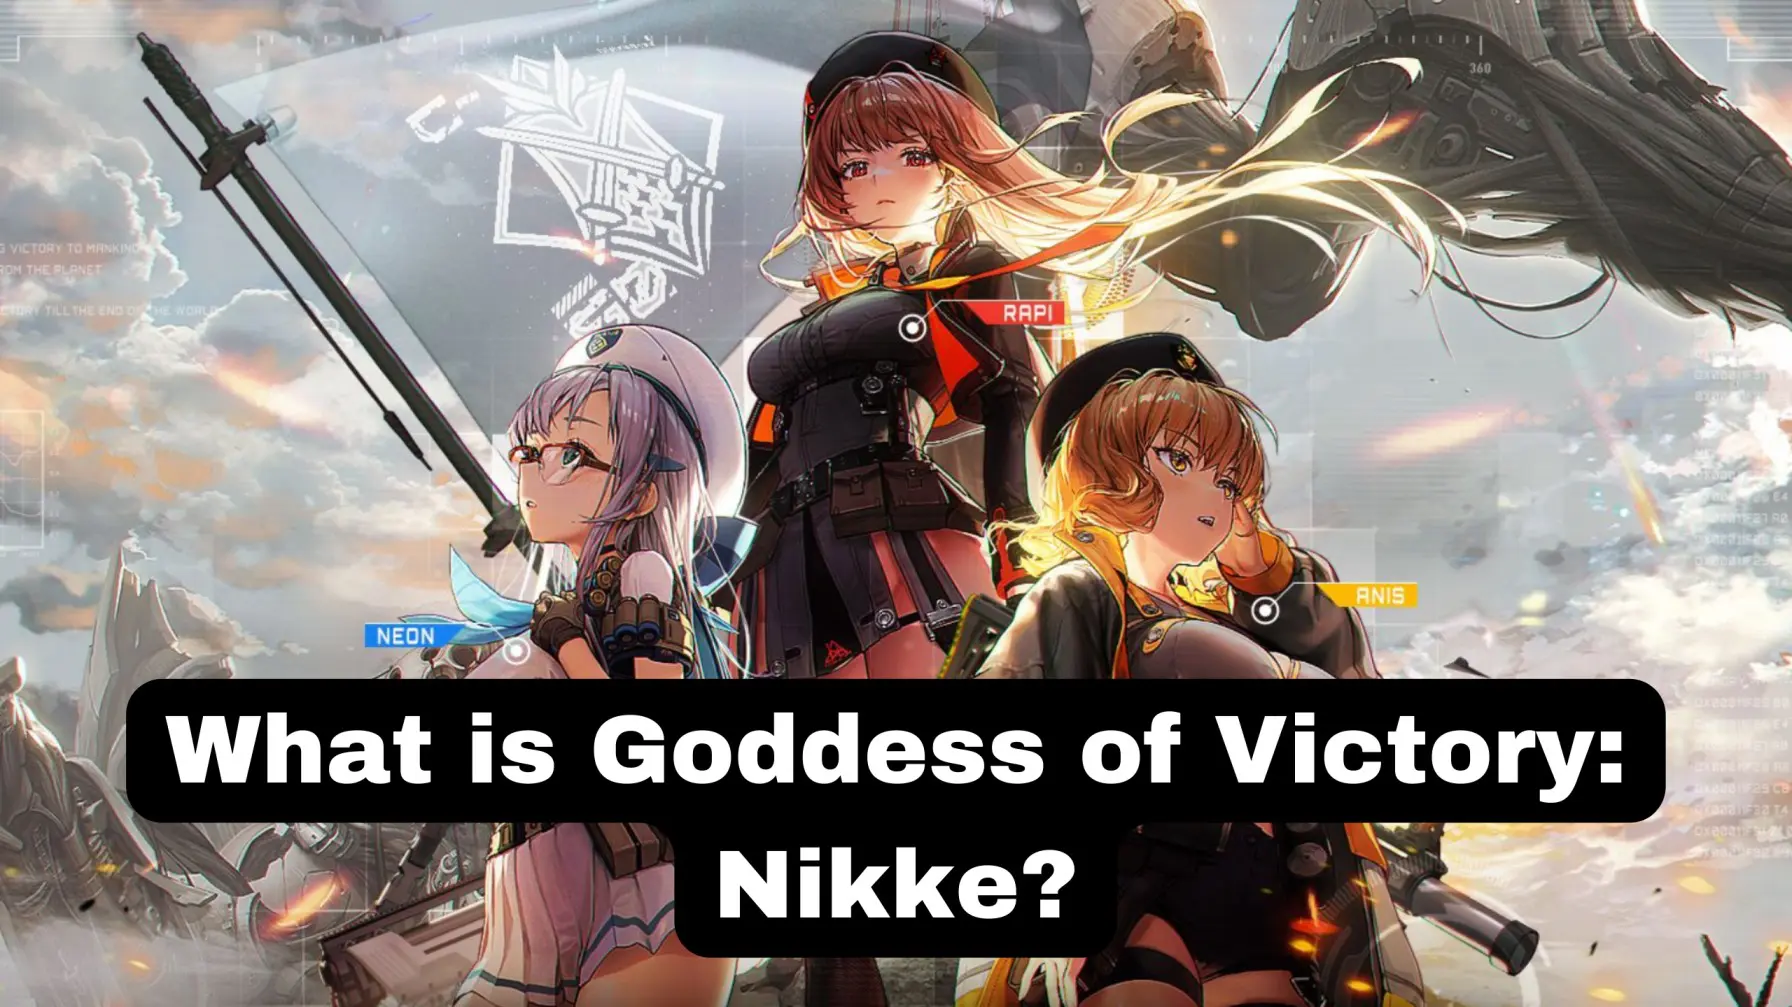 What is Goddess of Victory Nikke